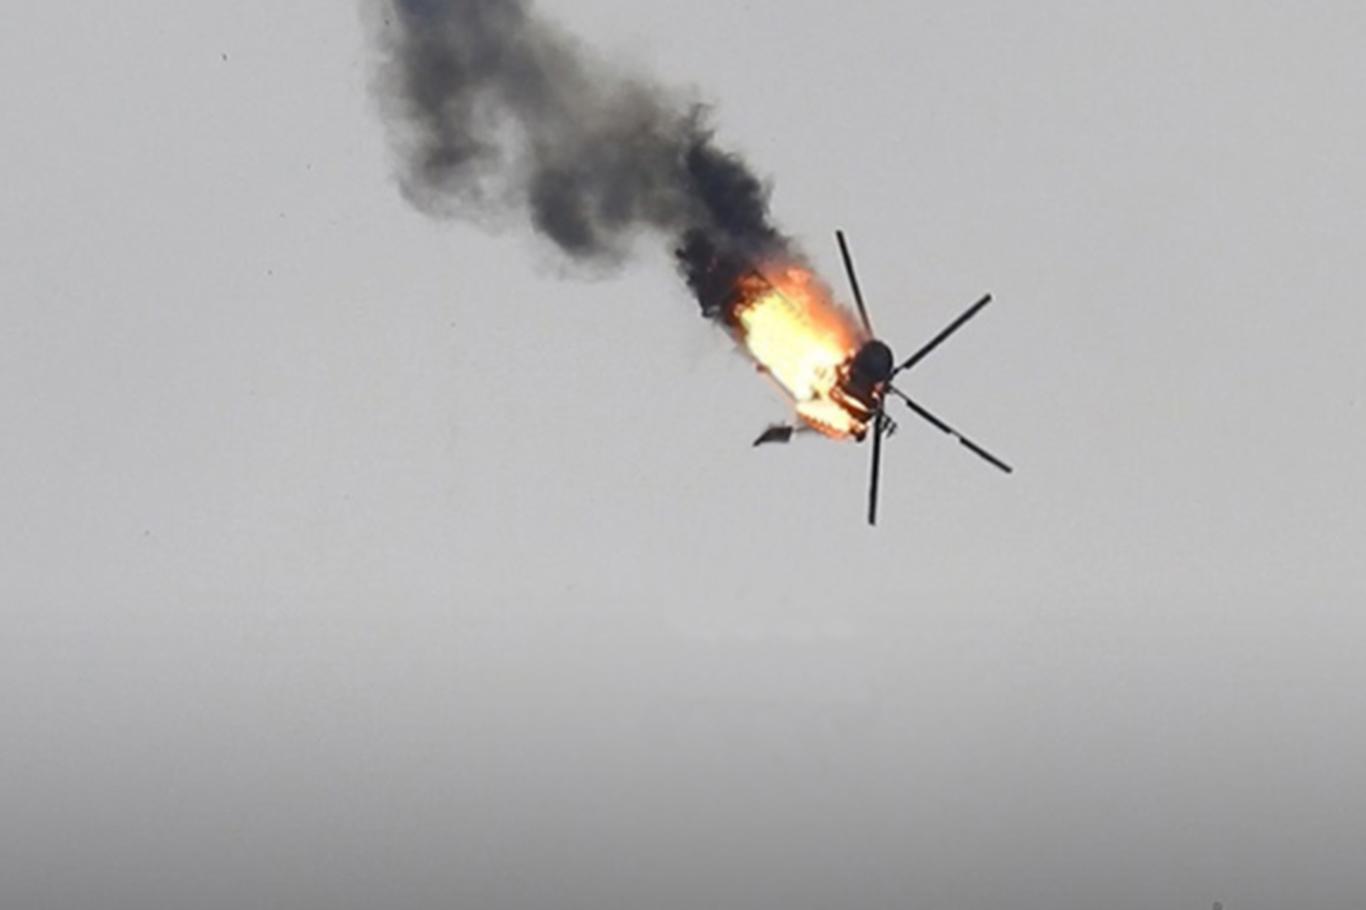 Syrian regime helicopter downed in Idlib